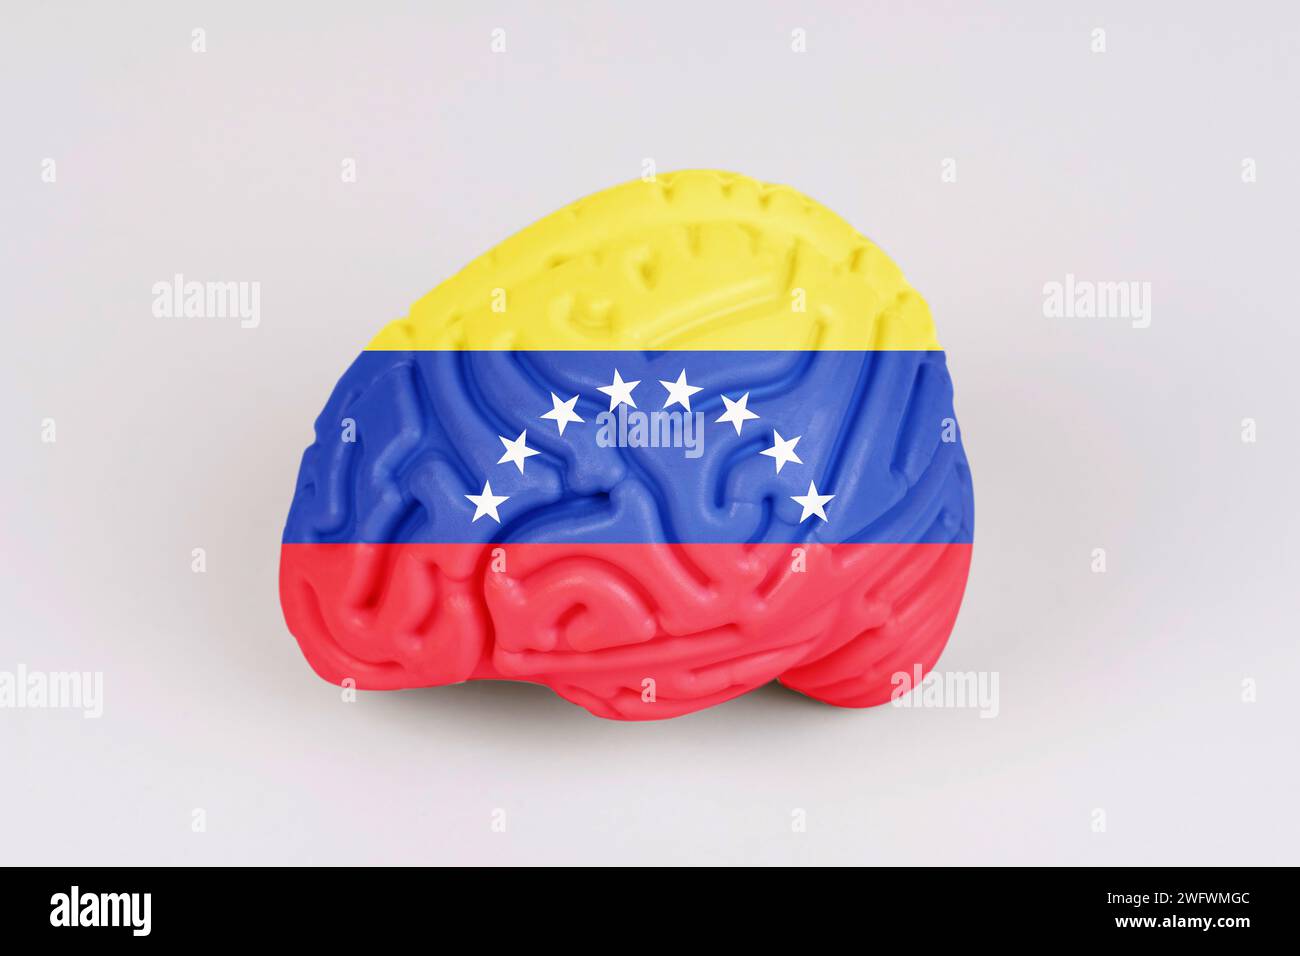 On a white background, a model of the brain with a picture of a flag - Venezuela. Close-up Stock Photo